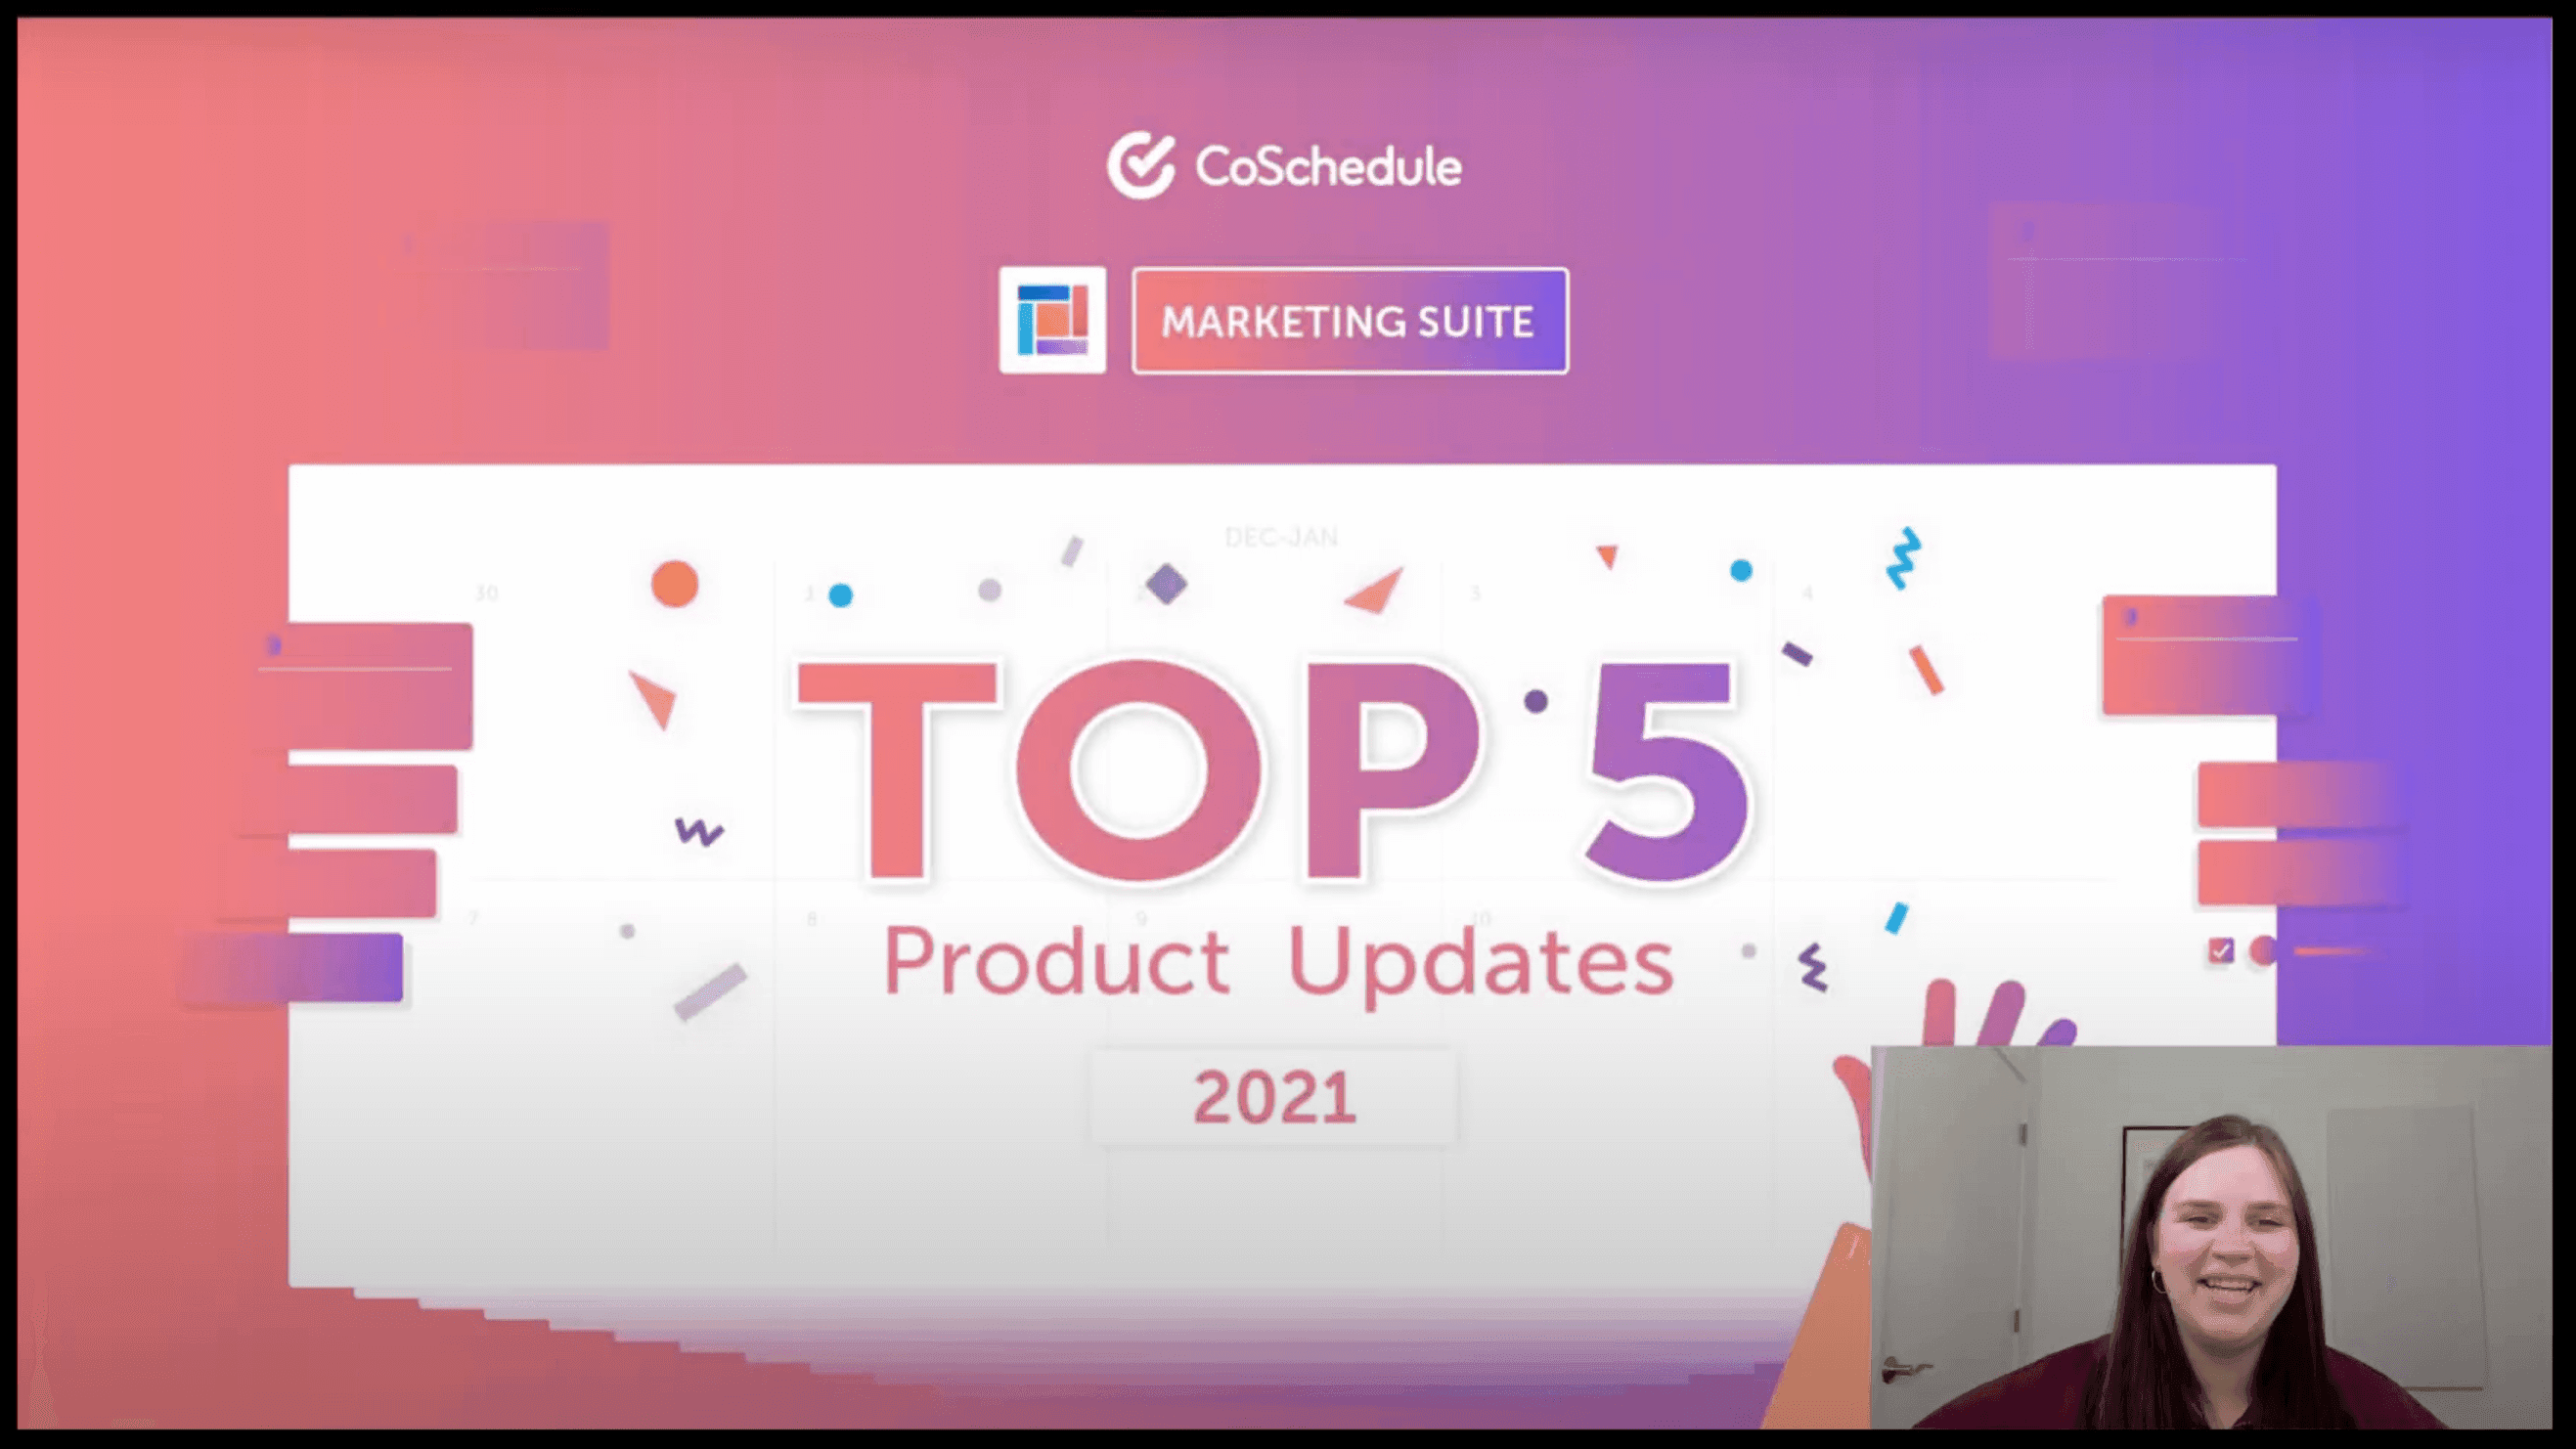 top 5 product updates video produced by coschedule